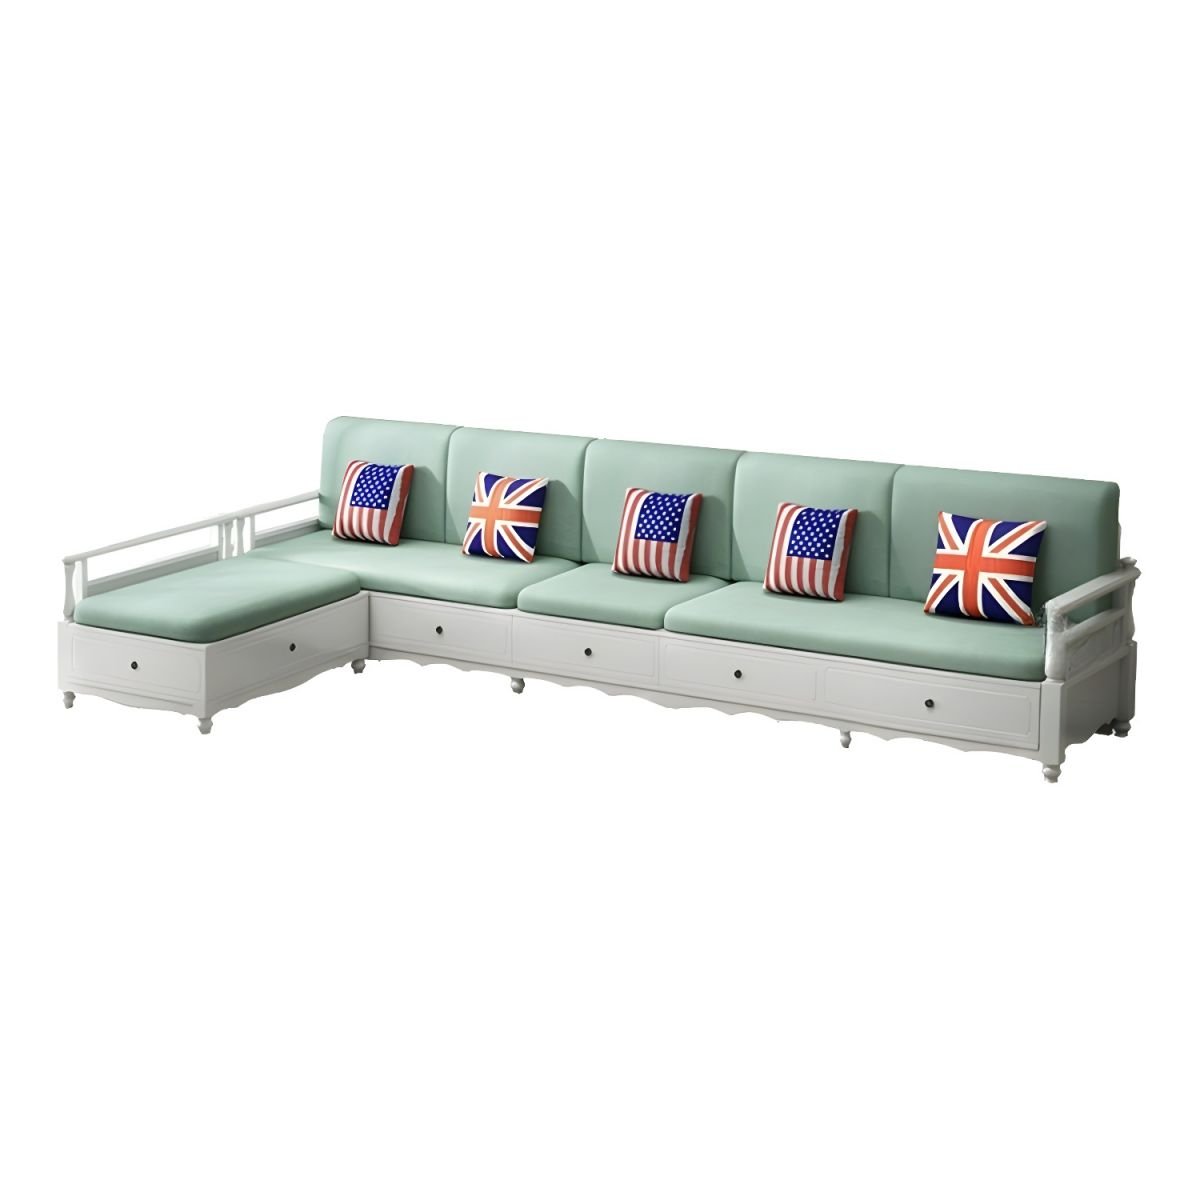 Rustic Green Farmhouse Sectional Sofa with Under-Seat Storage for Shallow Width Comfort - 141"L x 72"W x 35"H Cotton and Linen